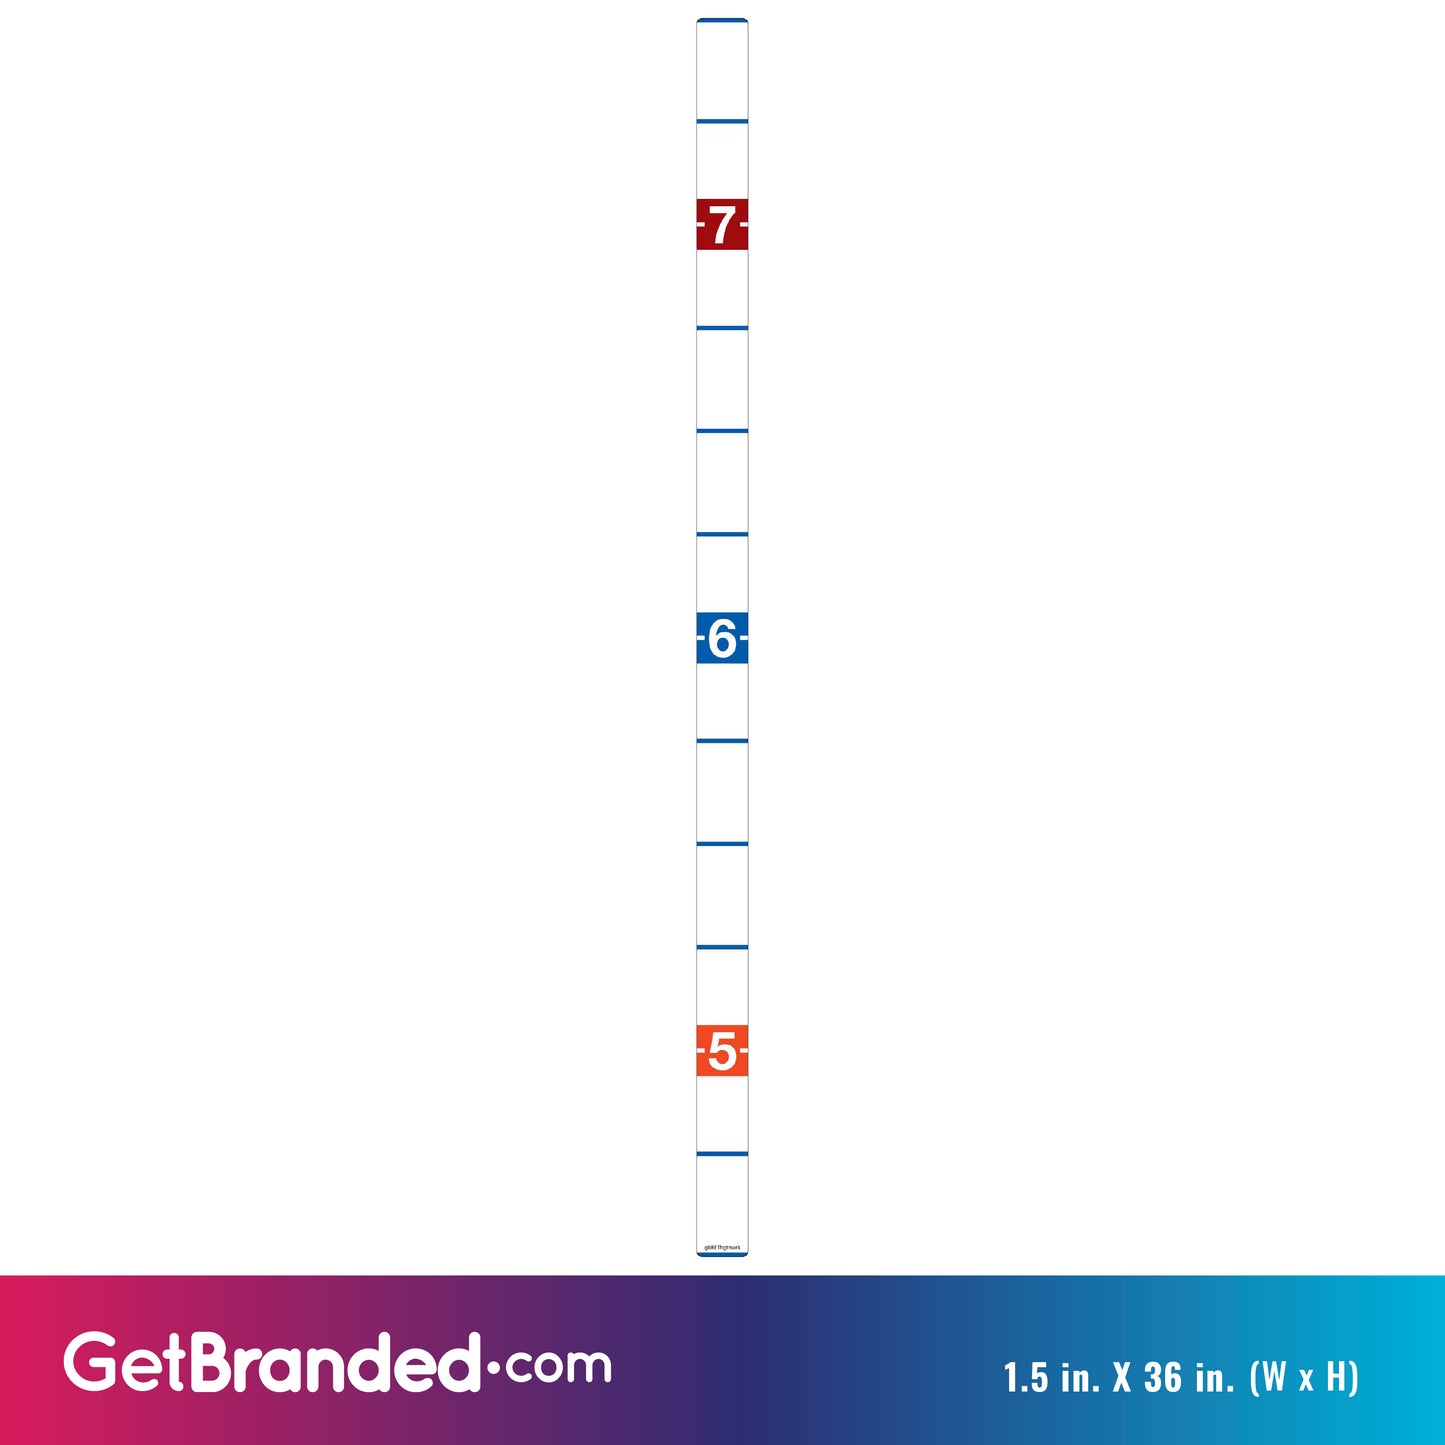 GetBranded.com-1.5" x 36" Security Height Marker size guide.